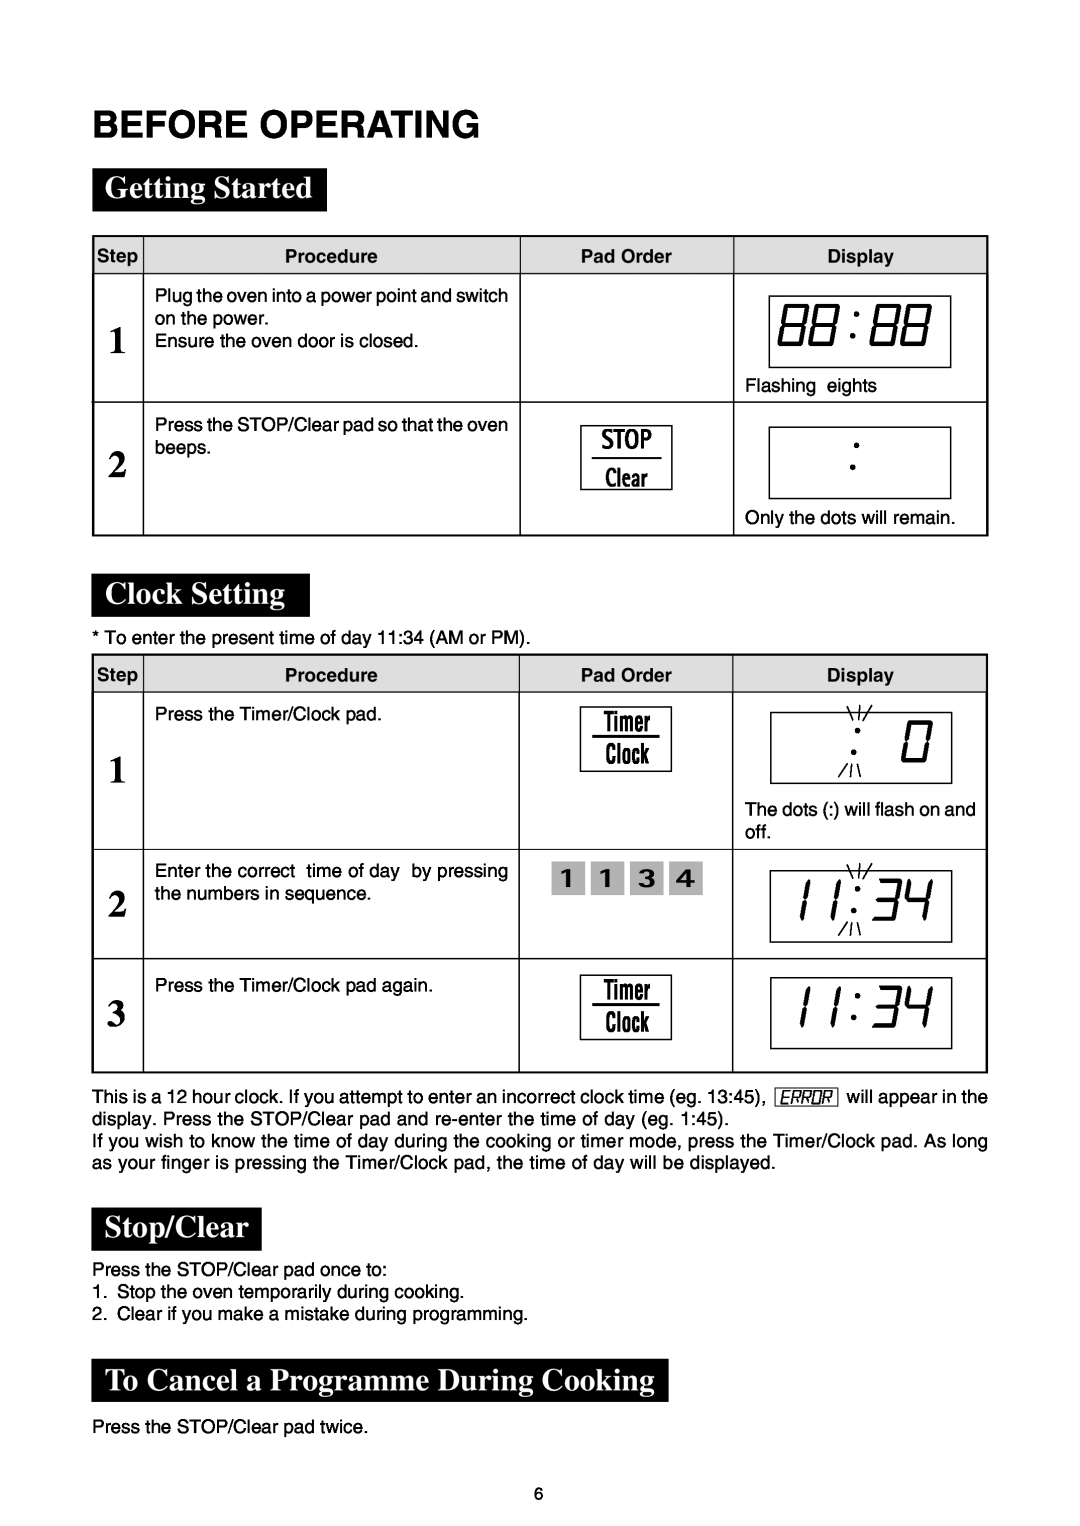 Sharp R-520E manual Before Operating, Getting Started, Clock Setting, Stop/Clear, To Cancel a Programme During Cooking 